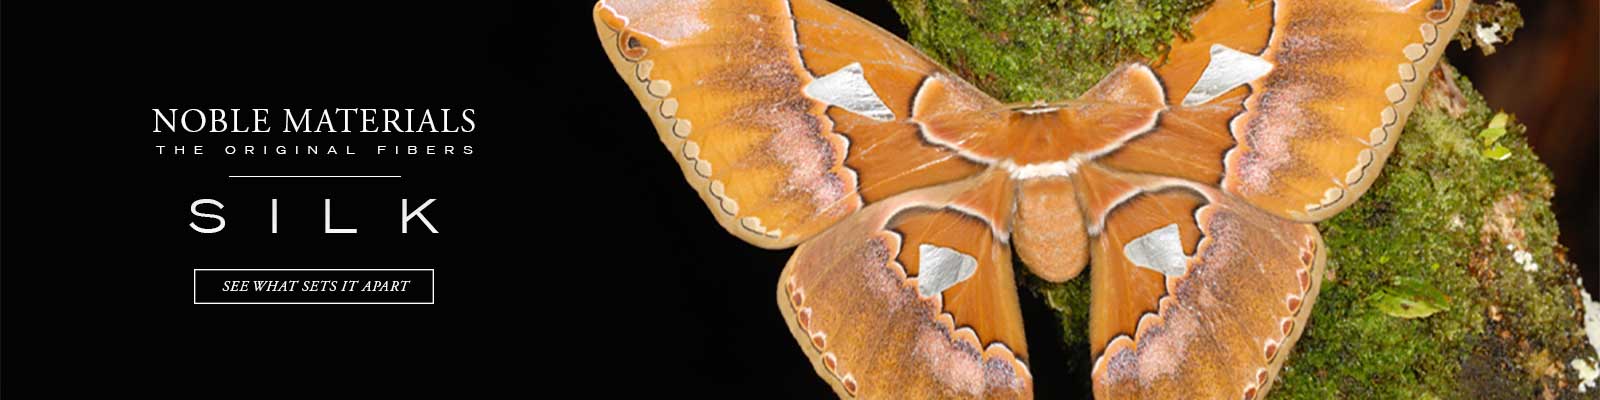 The silk moth is the source of silk, one of the original fibers, one of the finest, luxury textile materials.